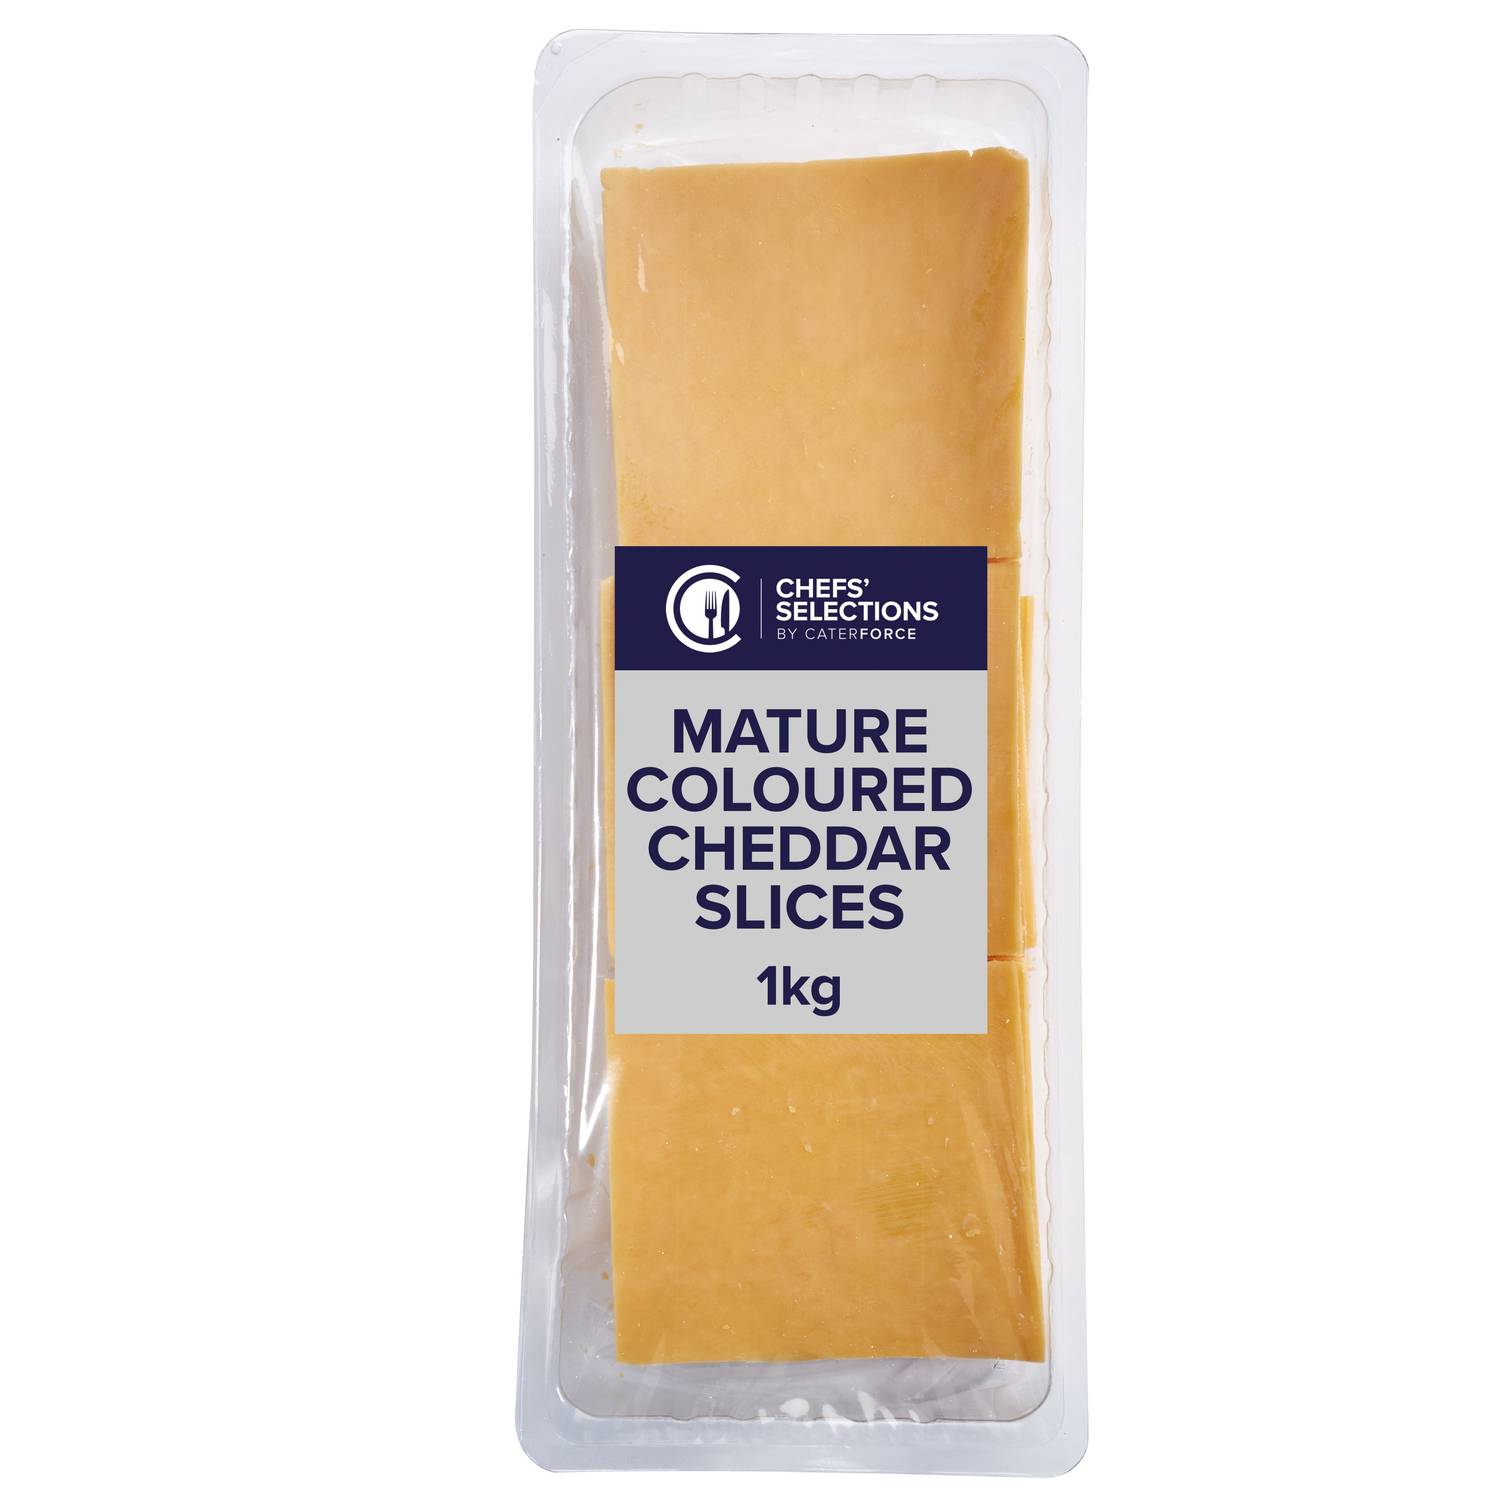 Chefs’ Selections Mature Coloured Cheddar Cheese Slices (6 x 1kg)